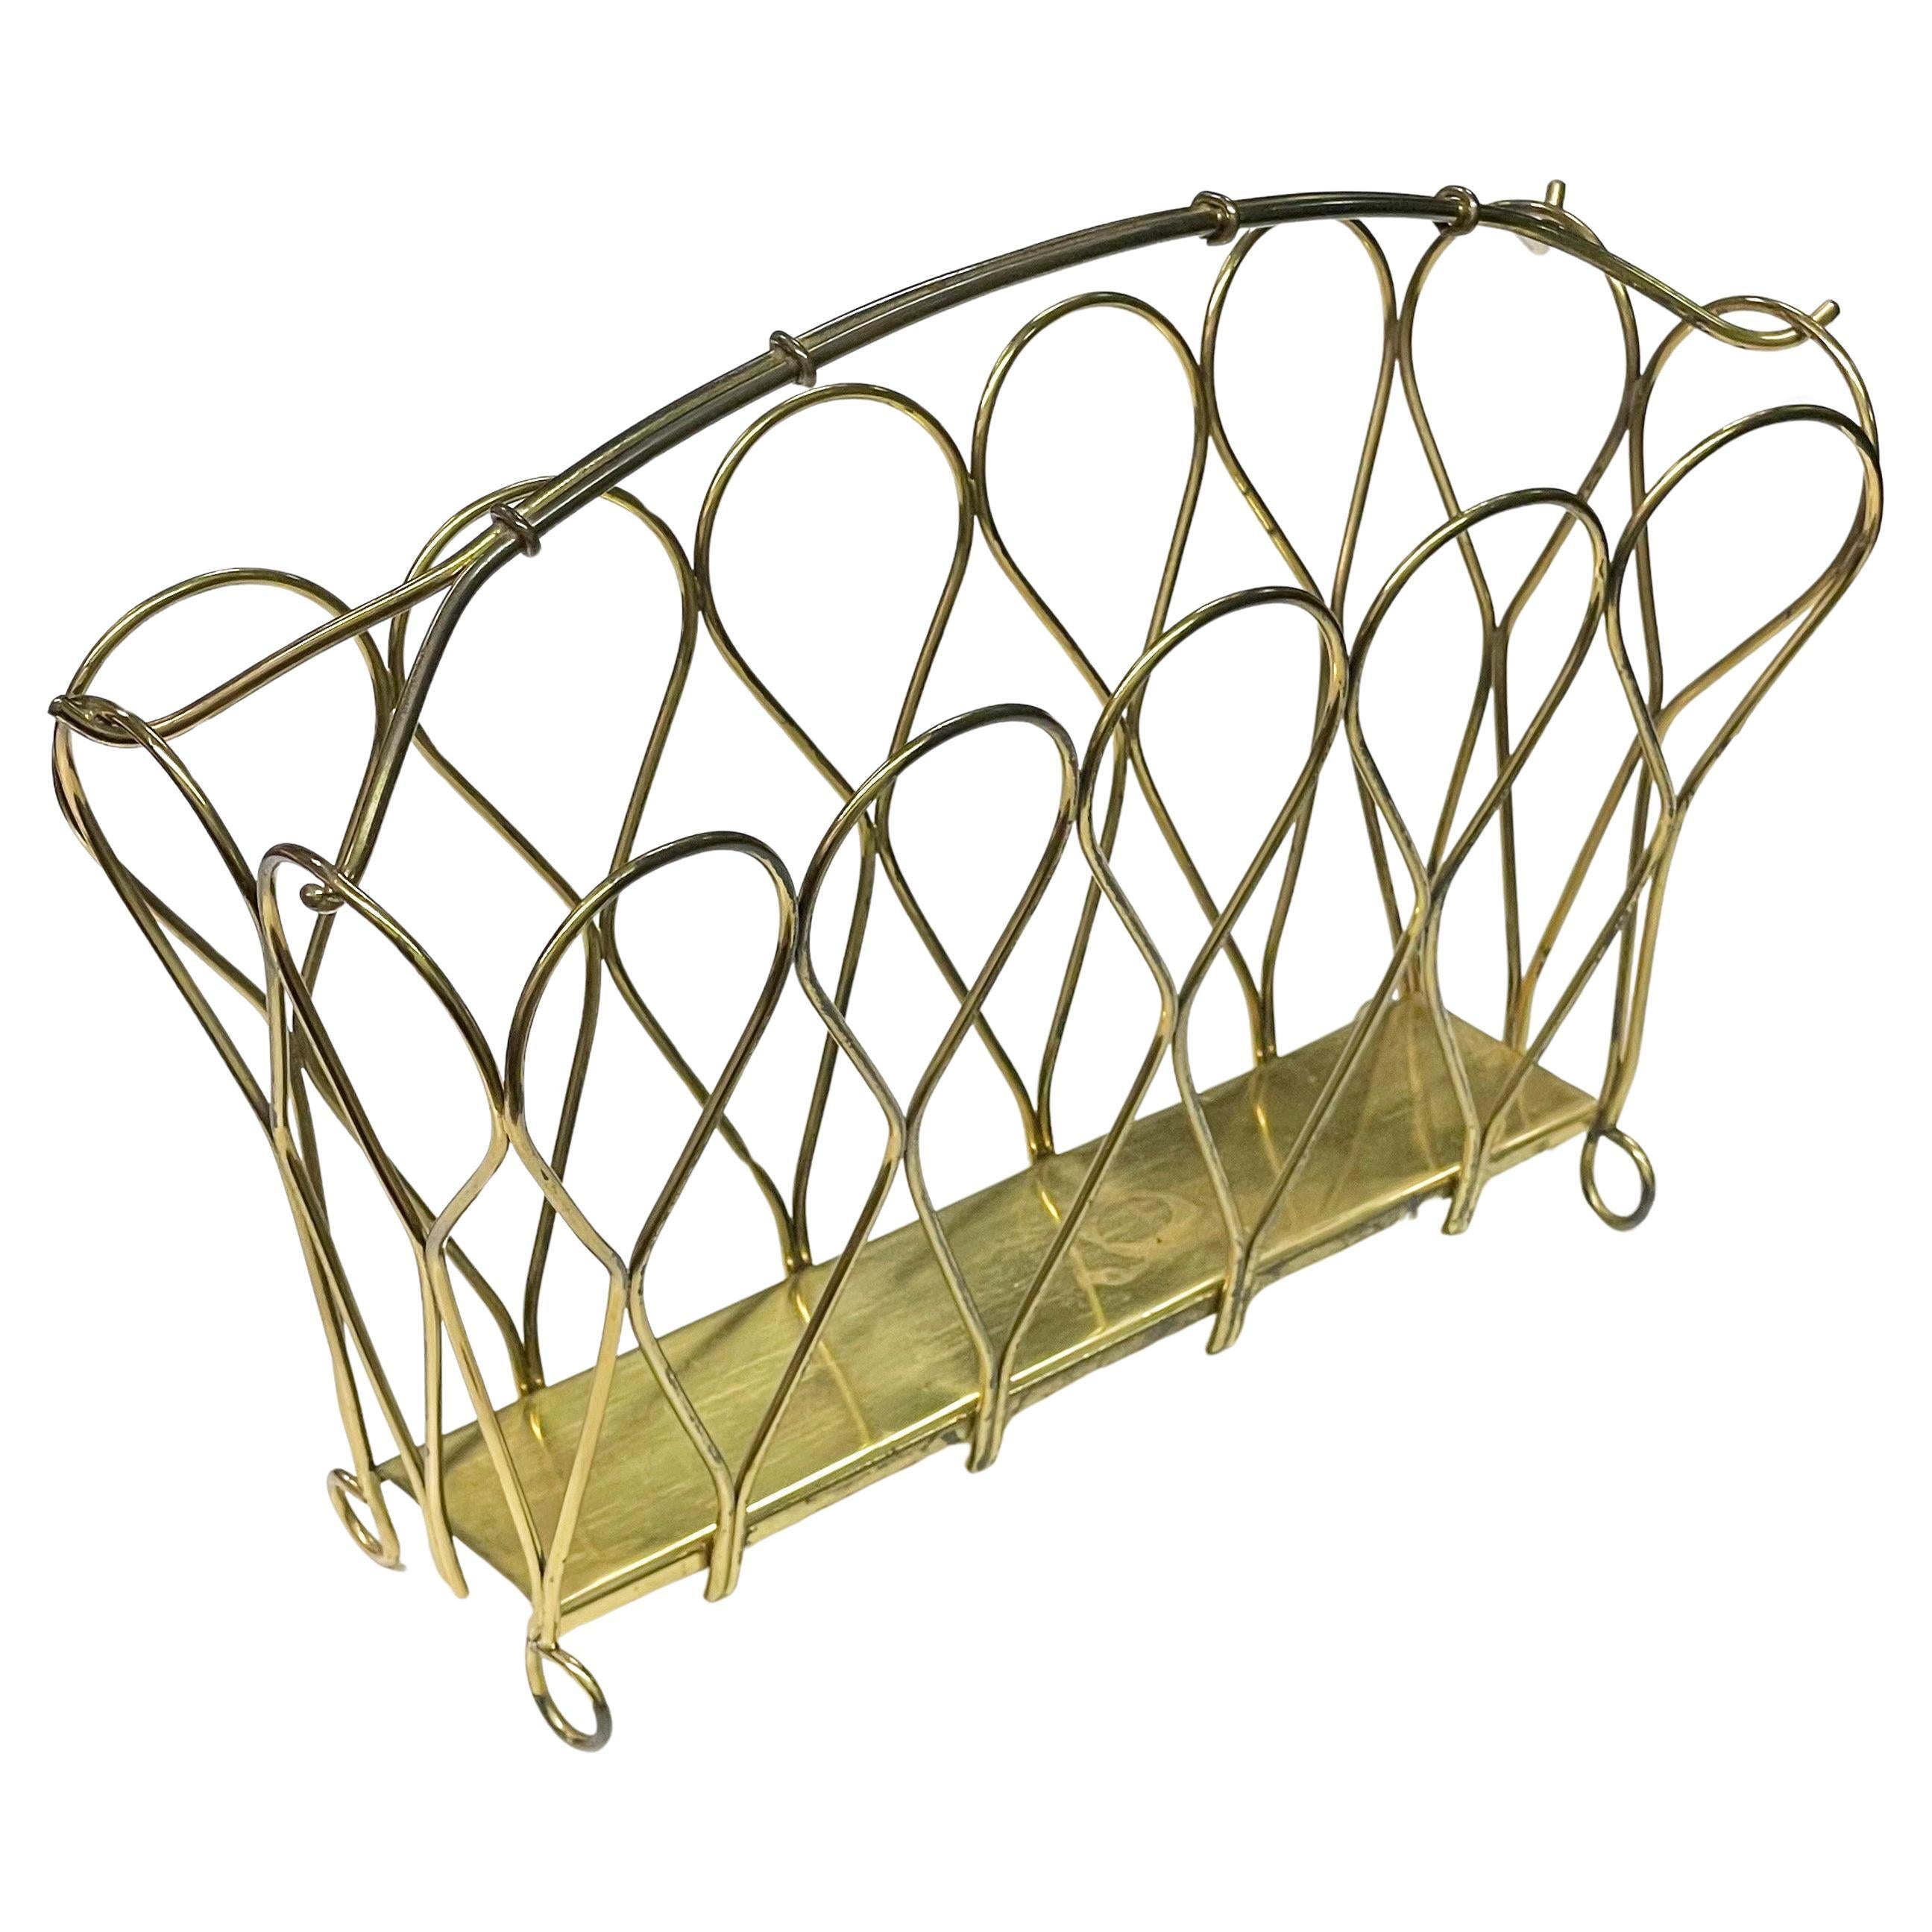 Stylish Mid Century Brass Magazine / Newspaper Rack. Believed to be produced Switzerland in the 1950’s.
Measurements: Height: 38cm  Width: 42 cm  Depth: 27 cm